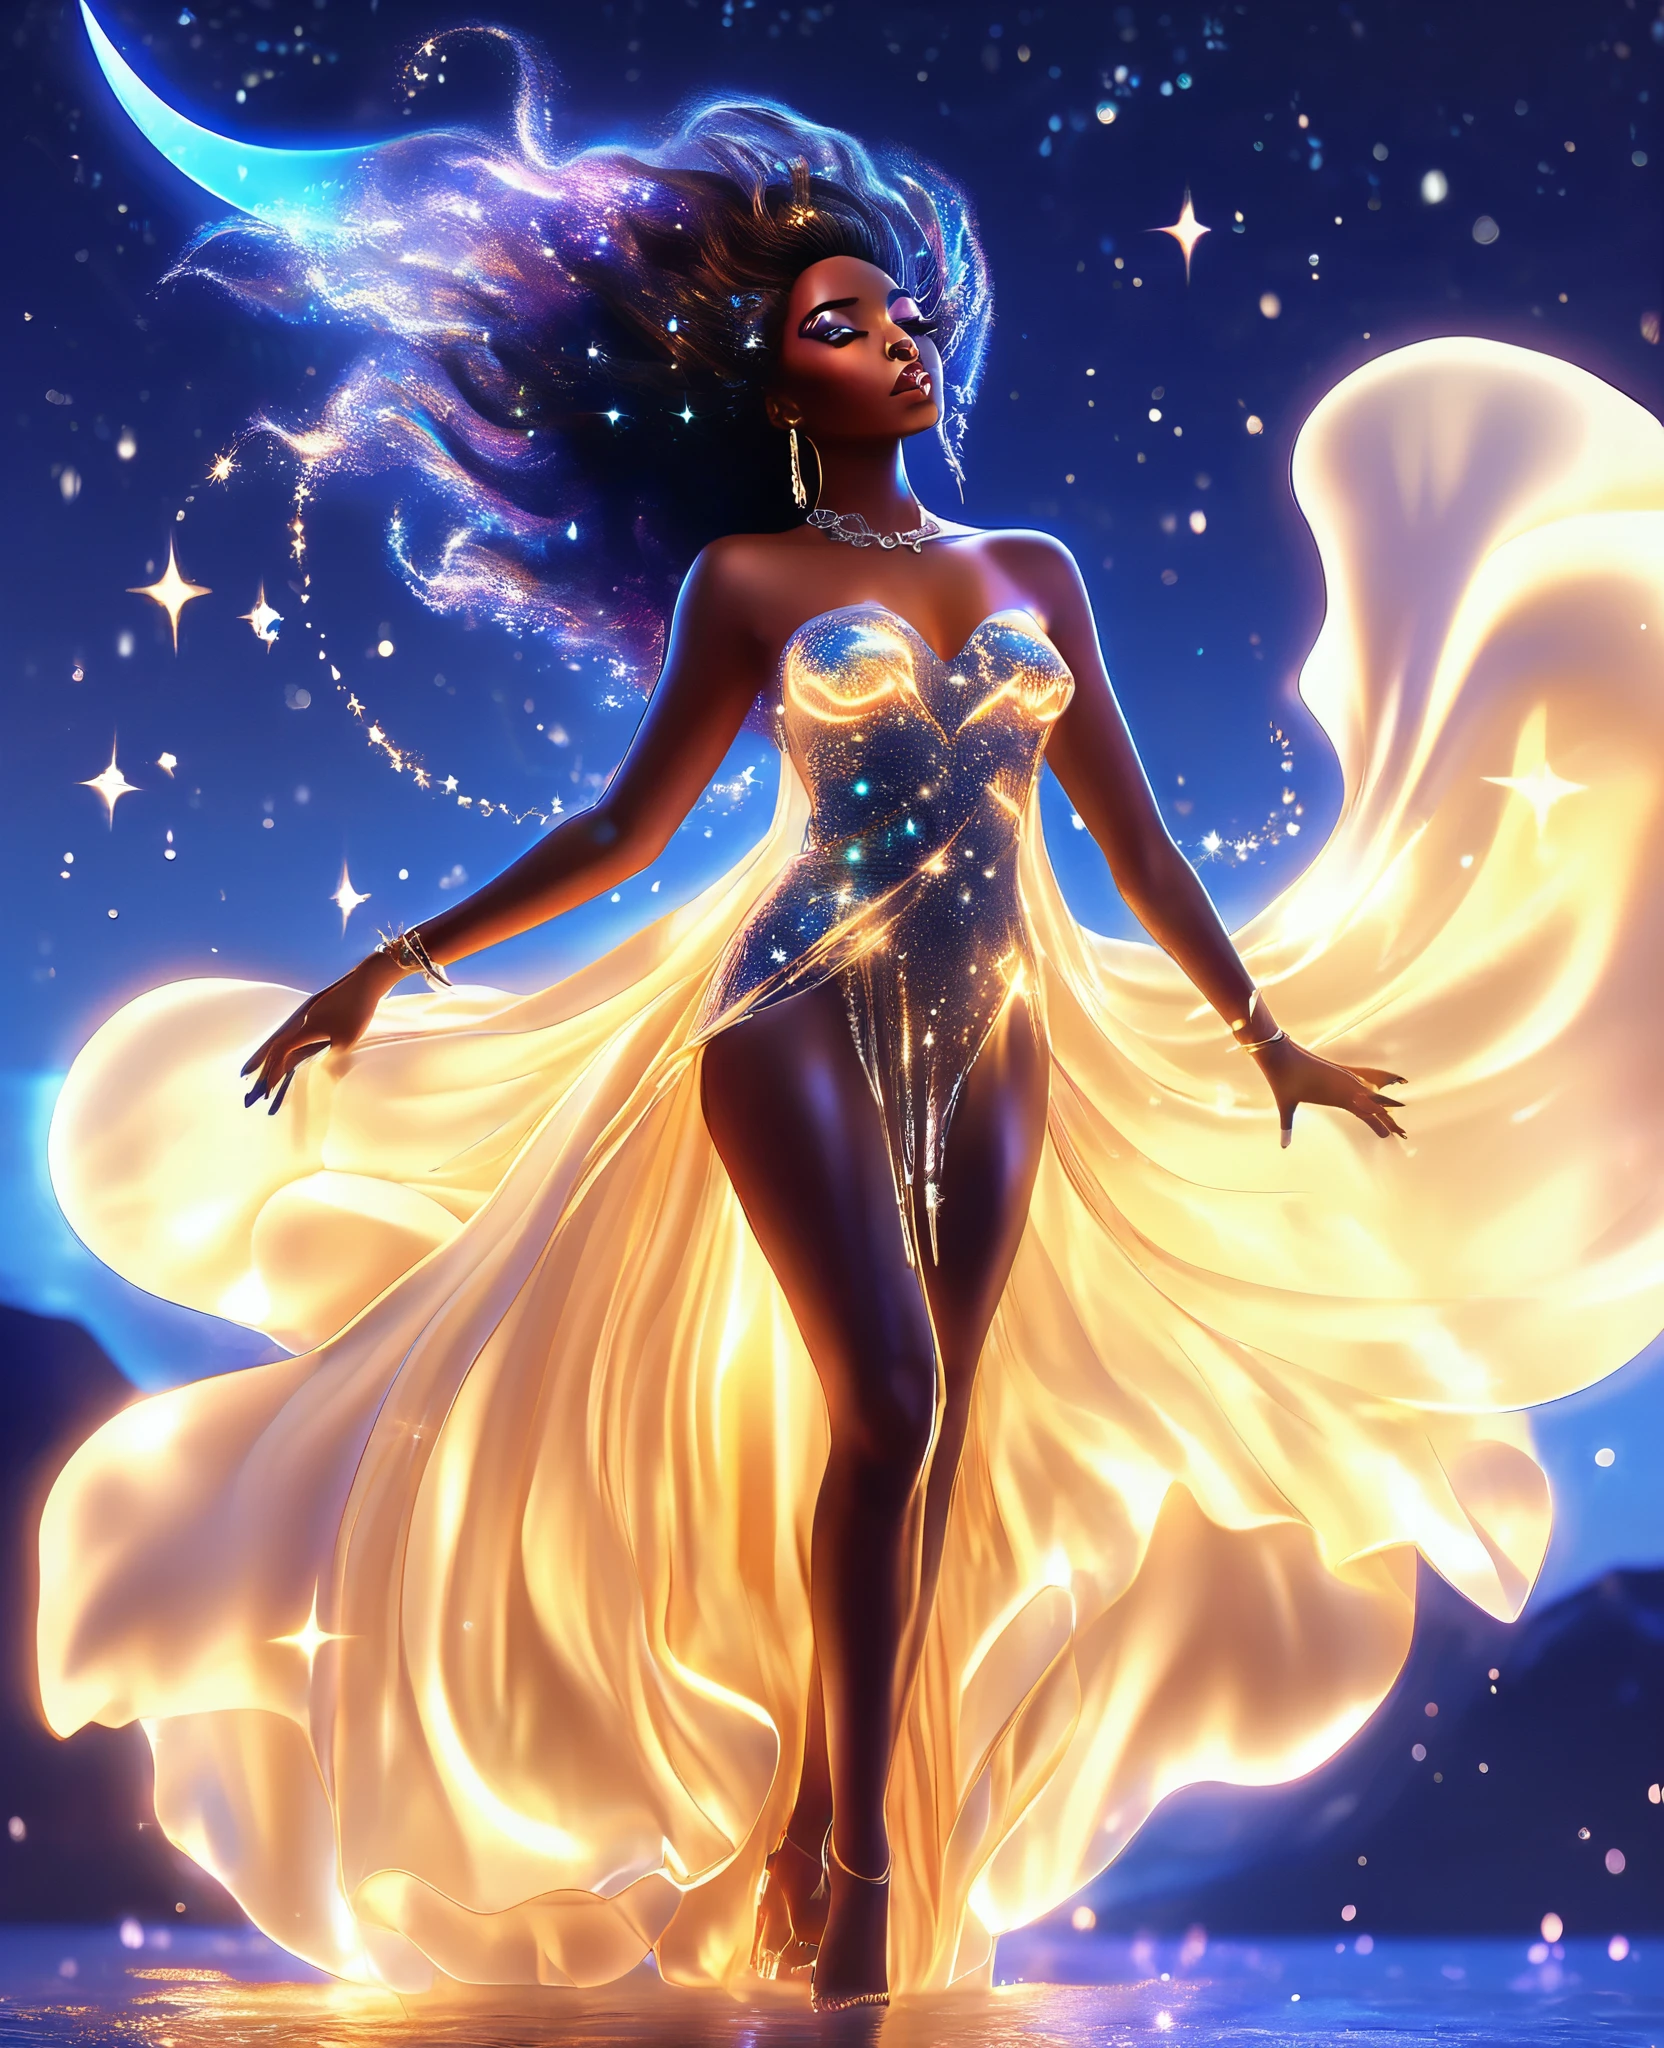 A luminous black woman formed entirely of radiant, twinkling stars, suspended in the celestial expanse, draped in a flowing, ethereal gown that undulates with a life of its own. Her transparent, starry body glimmers with an otherworldly light, as if she is a living, breathing galaxy. The night sky surrounding her is set aglow with vibrant, dancing aurora borealis, which reflects perfectly on the calm, moonlit ocean below. Create a stunning, 32k, ultra HD, hyper-realistic image that captures the magic of this enchanting scene, with every star and sparkle shining bright.